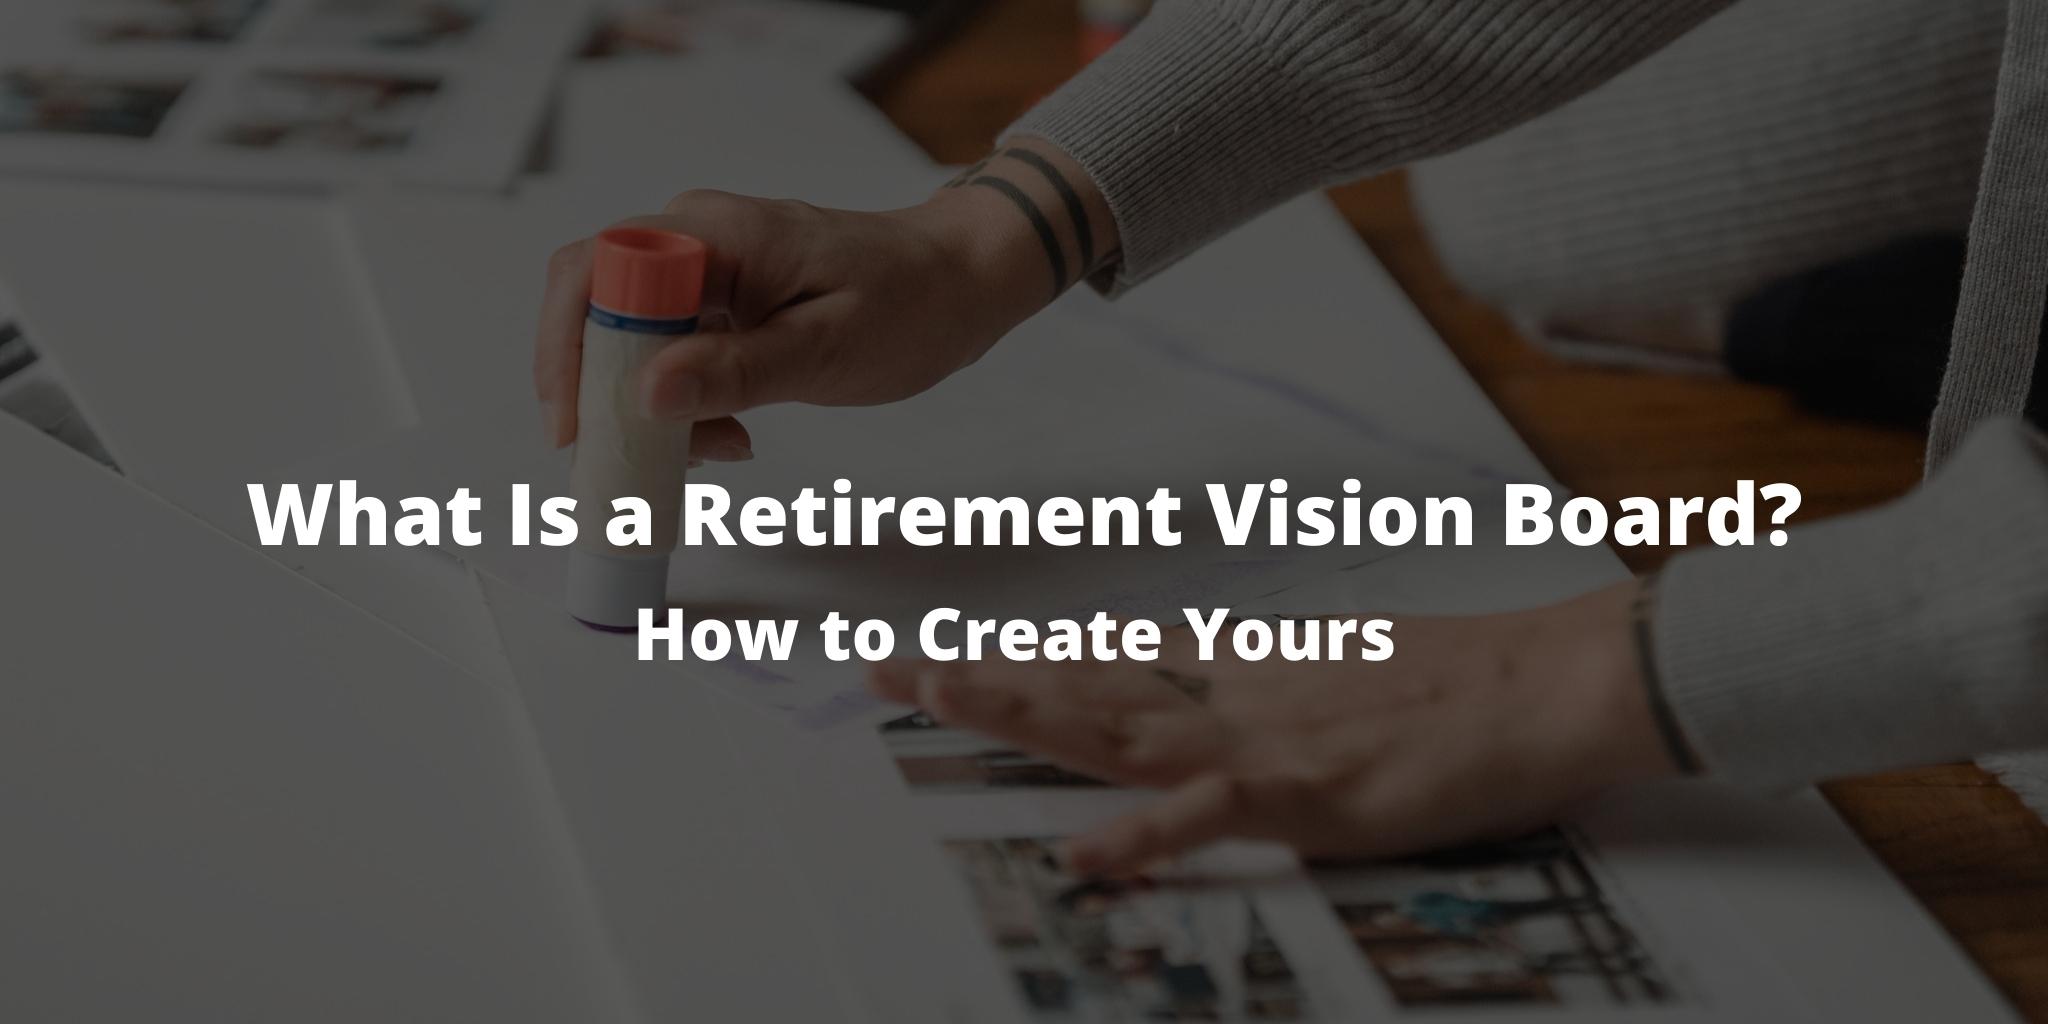 What Is a Retirement Vision Board? How to Create Yours